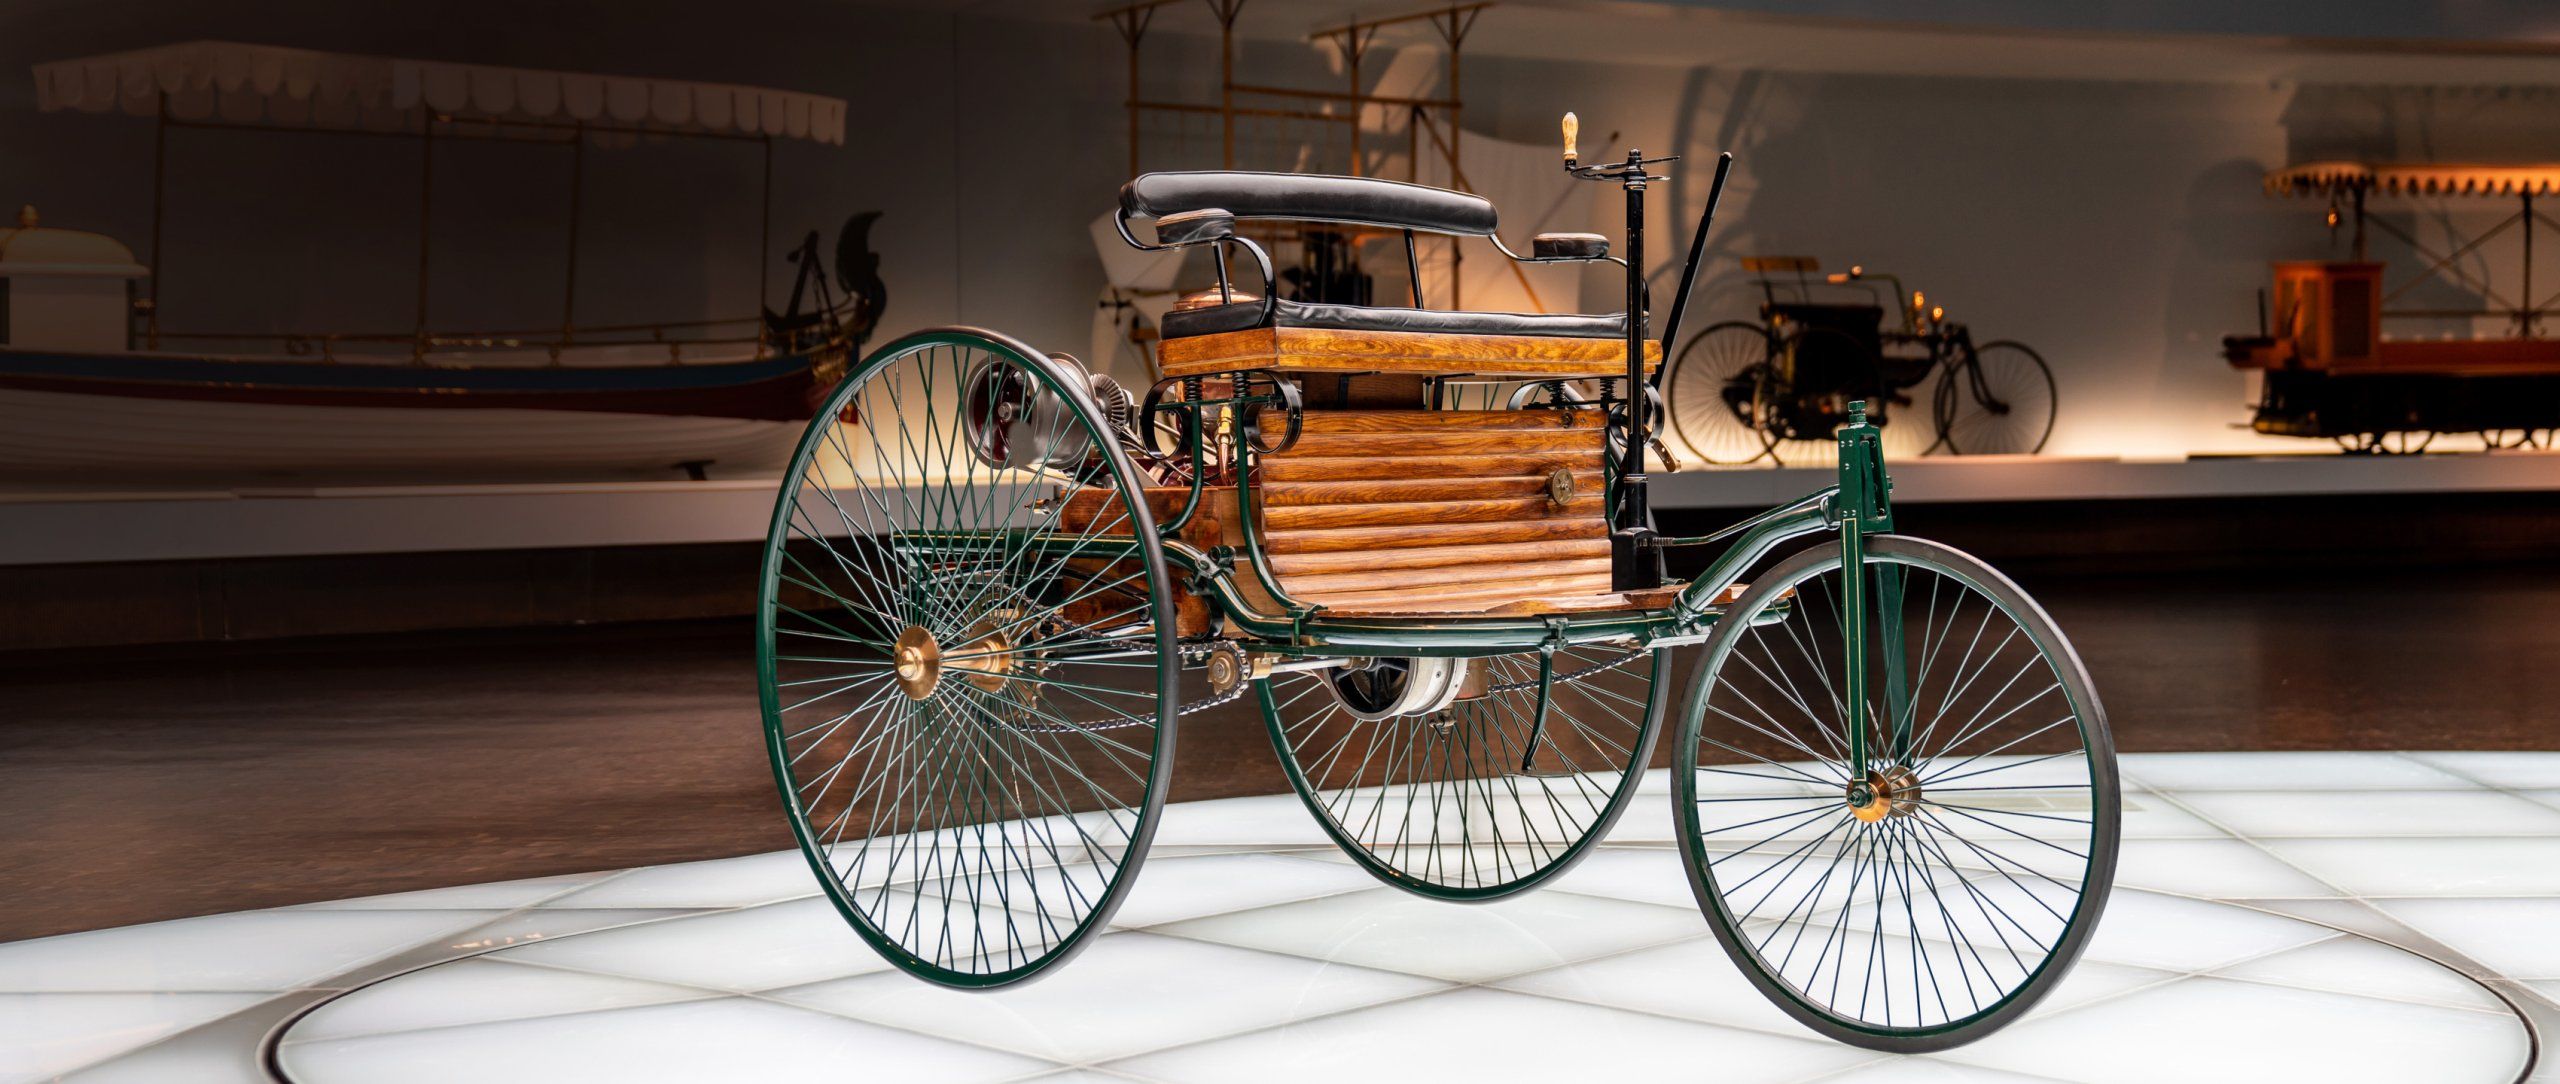 The First Mercedes-Benz by Karl Benz